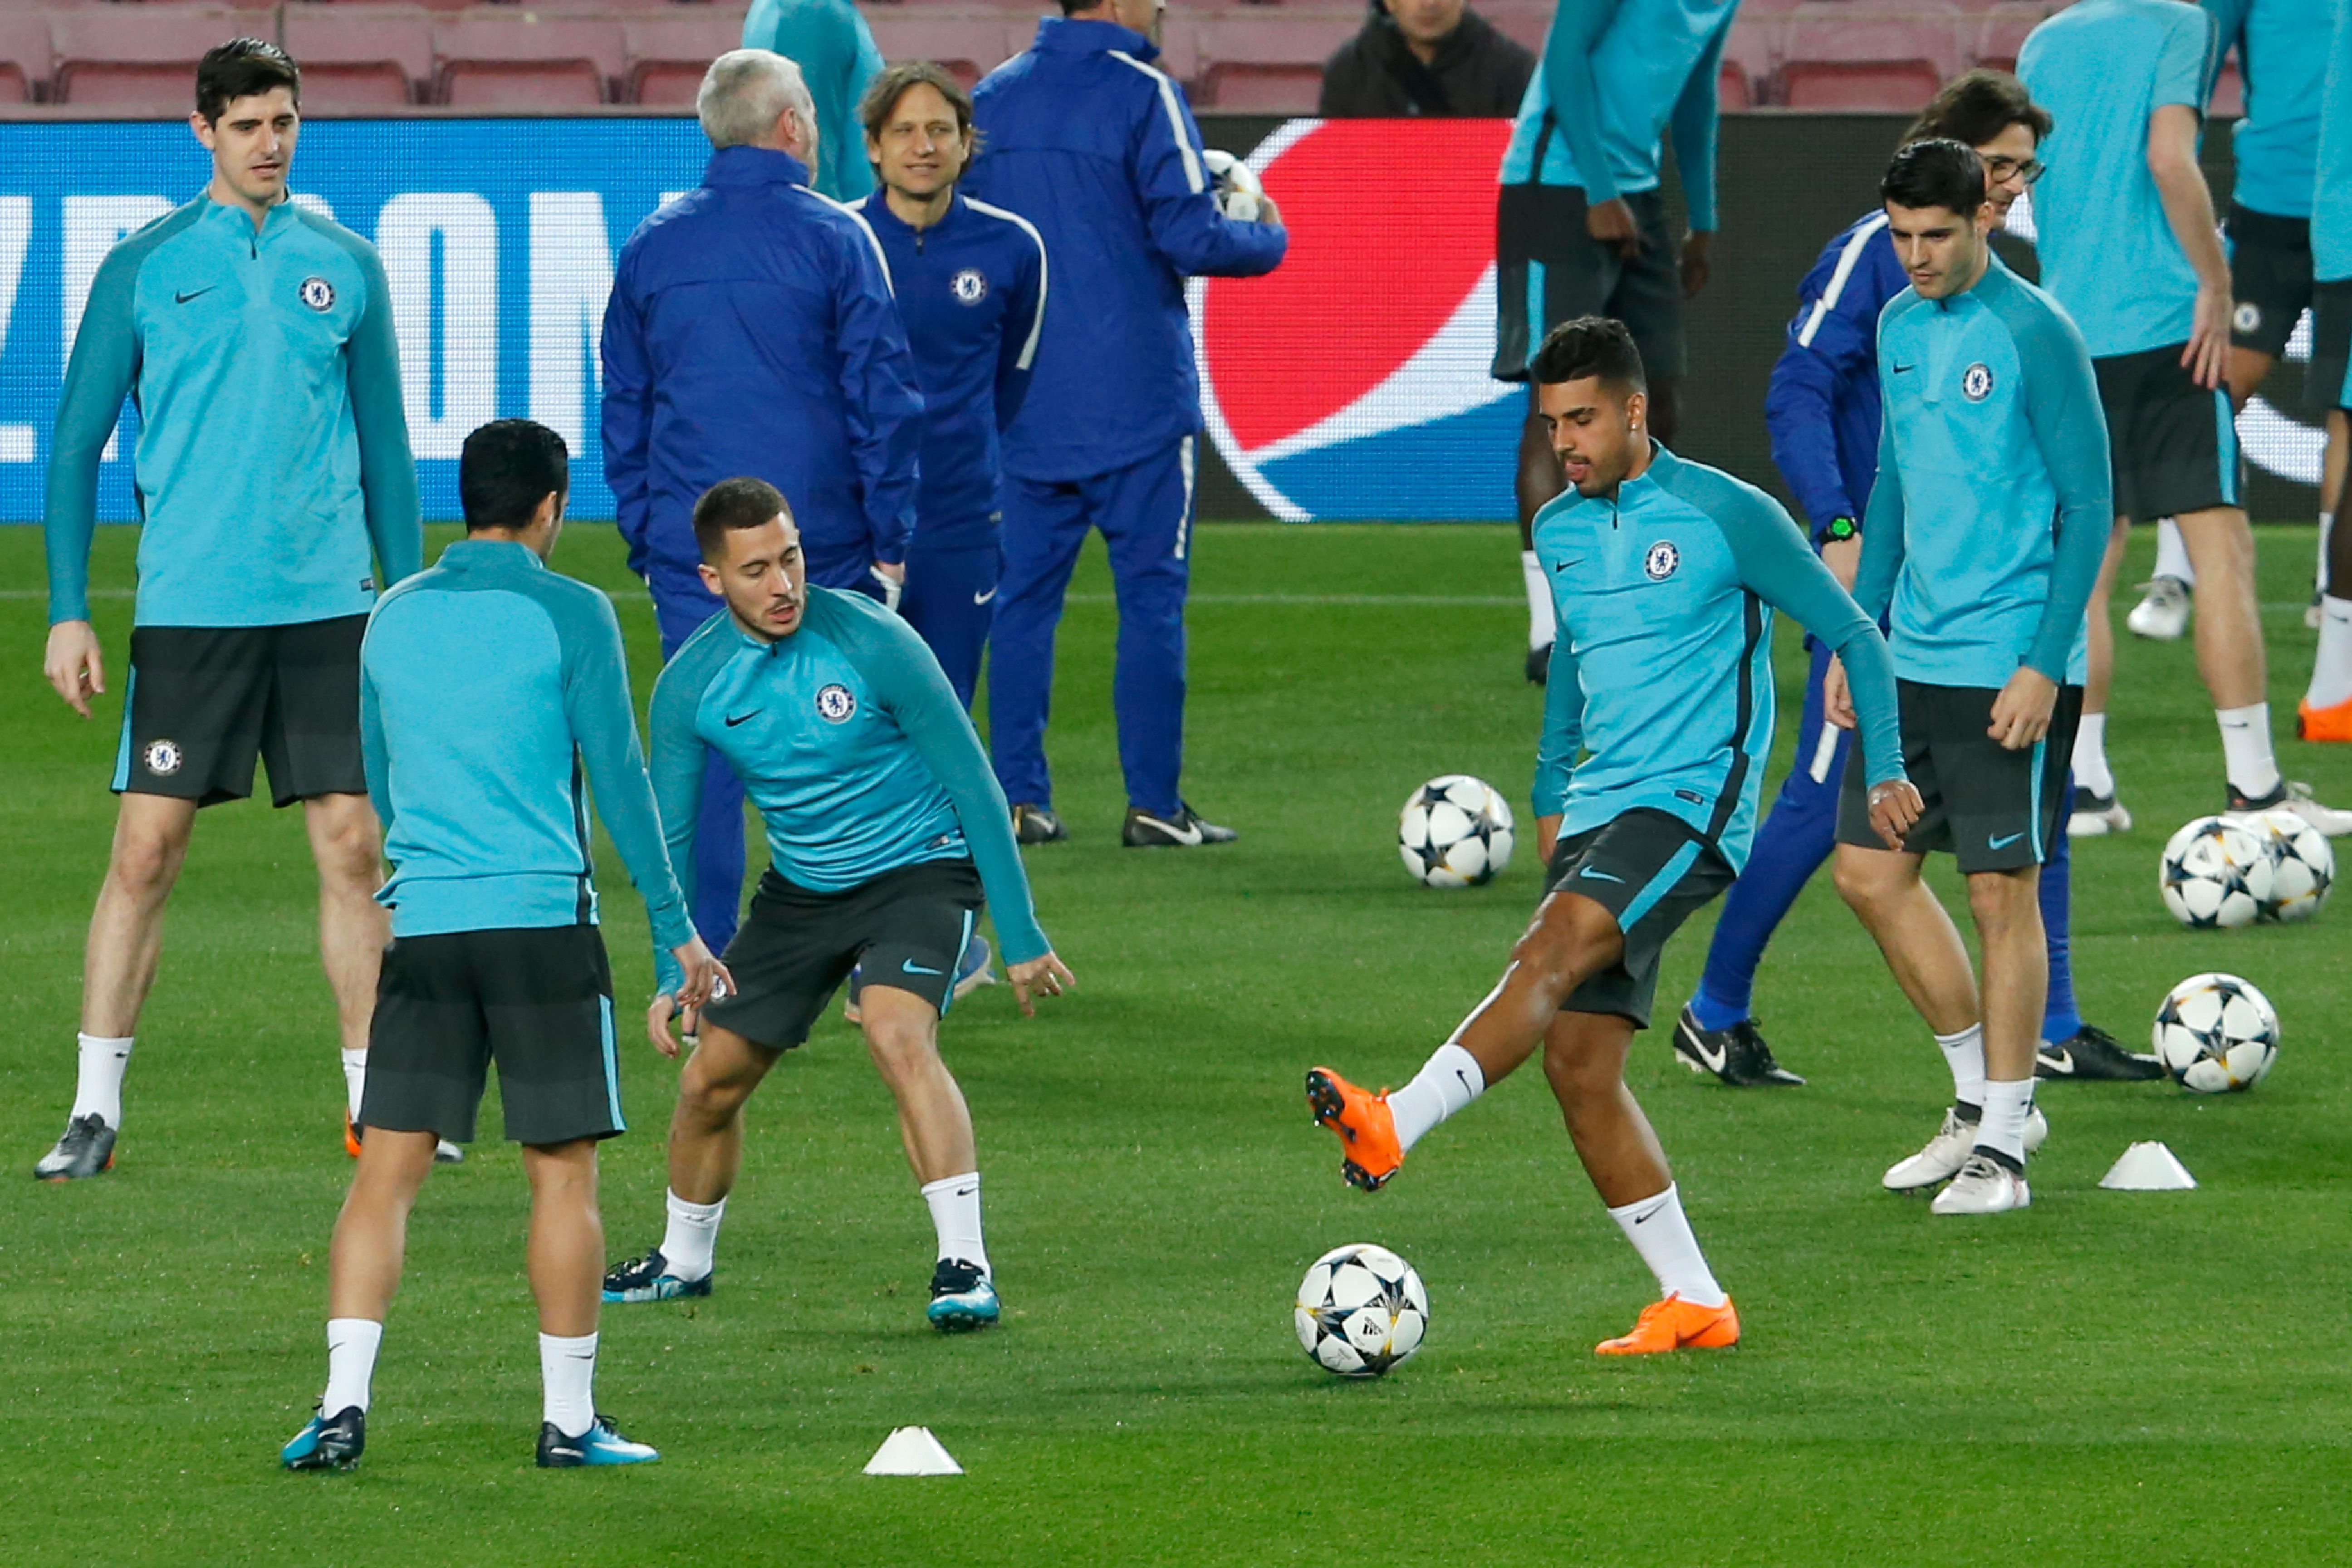 Chelsea's Brazilian defender Emerson Palmieri (2R) controls the ball during a training session at the Camp Nou stadium in Barcelona on March 13, 2018 on the eve of the UEFA Champions League round of 16 second leg football match between Barcelona and Chelsea. / AFP PHOTO / Pau Barrena        (Photo credit should read PAU BARRENA/AFP/Getty Images)